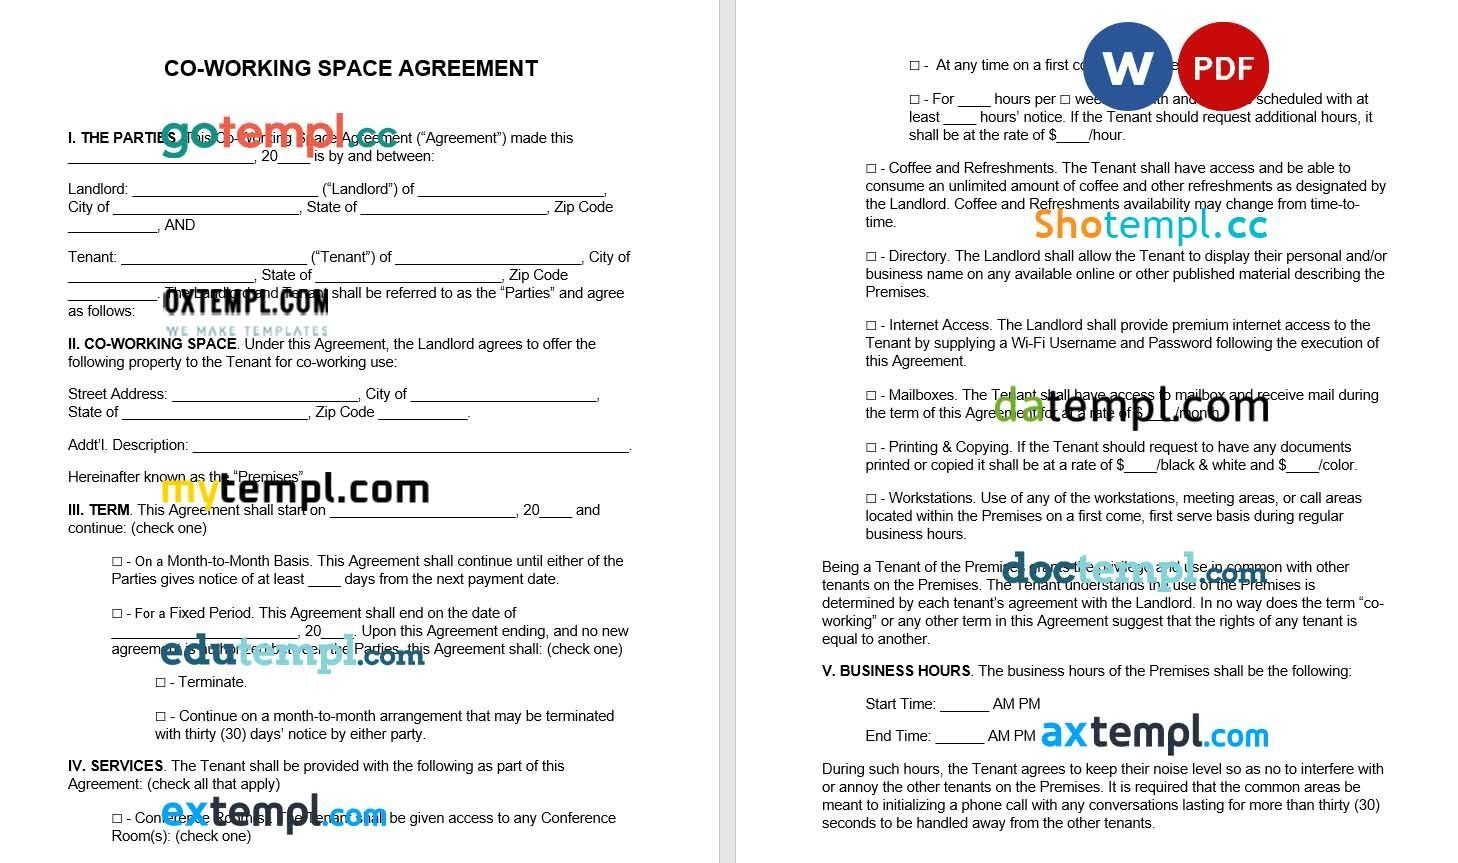 Co-Working Space Rental Agreement Word example, fully editable